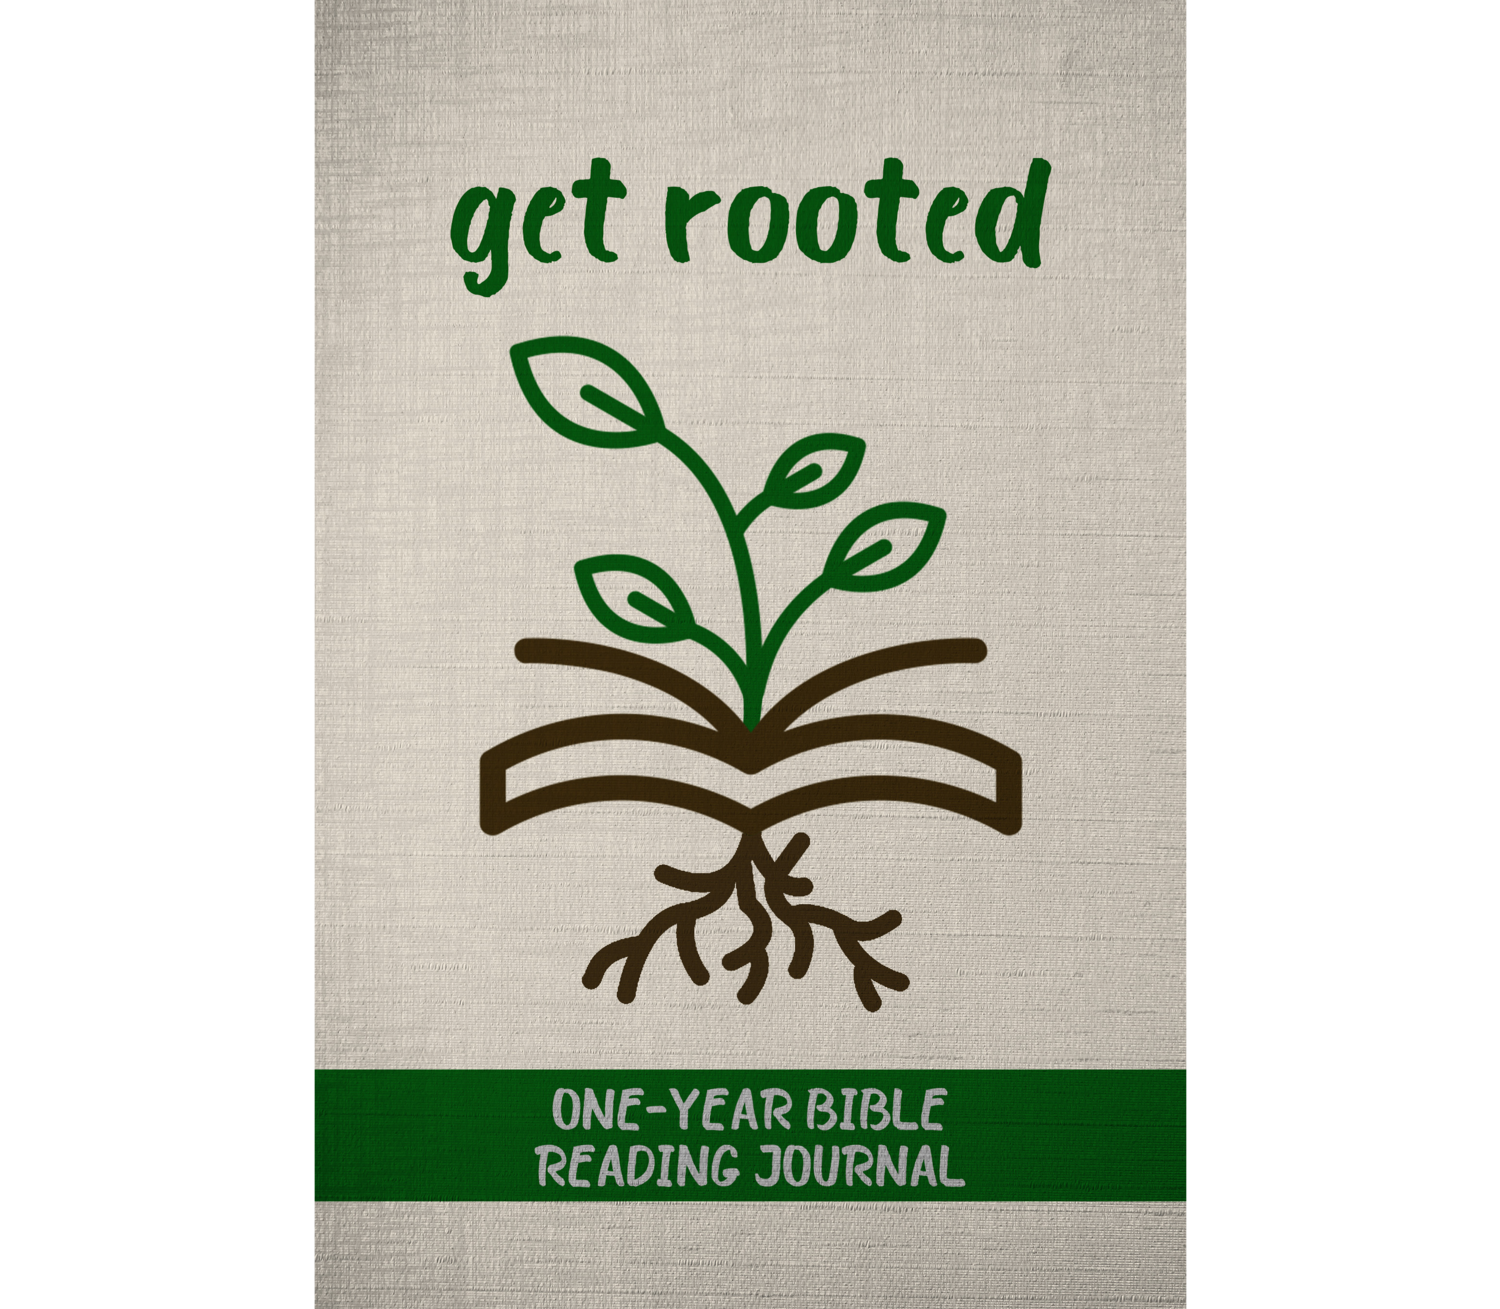 Get Rooted One-Year Bible Reading Journal